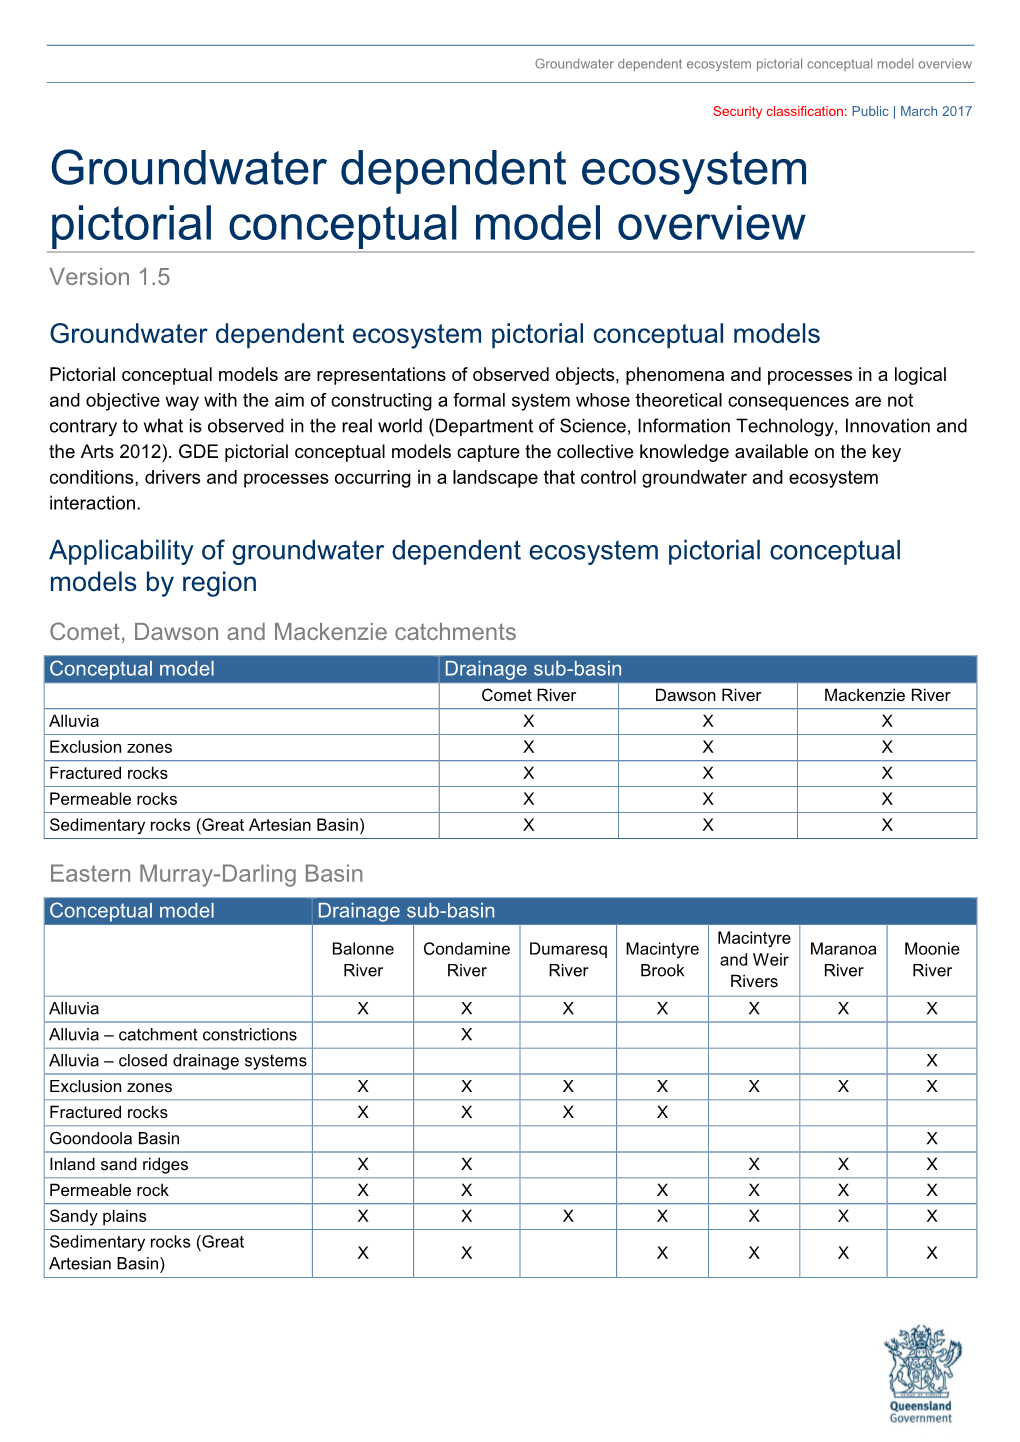 GDE Pictorial Conceptual Model Overview